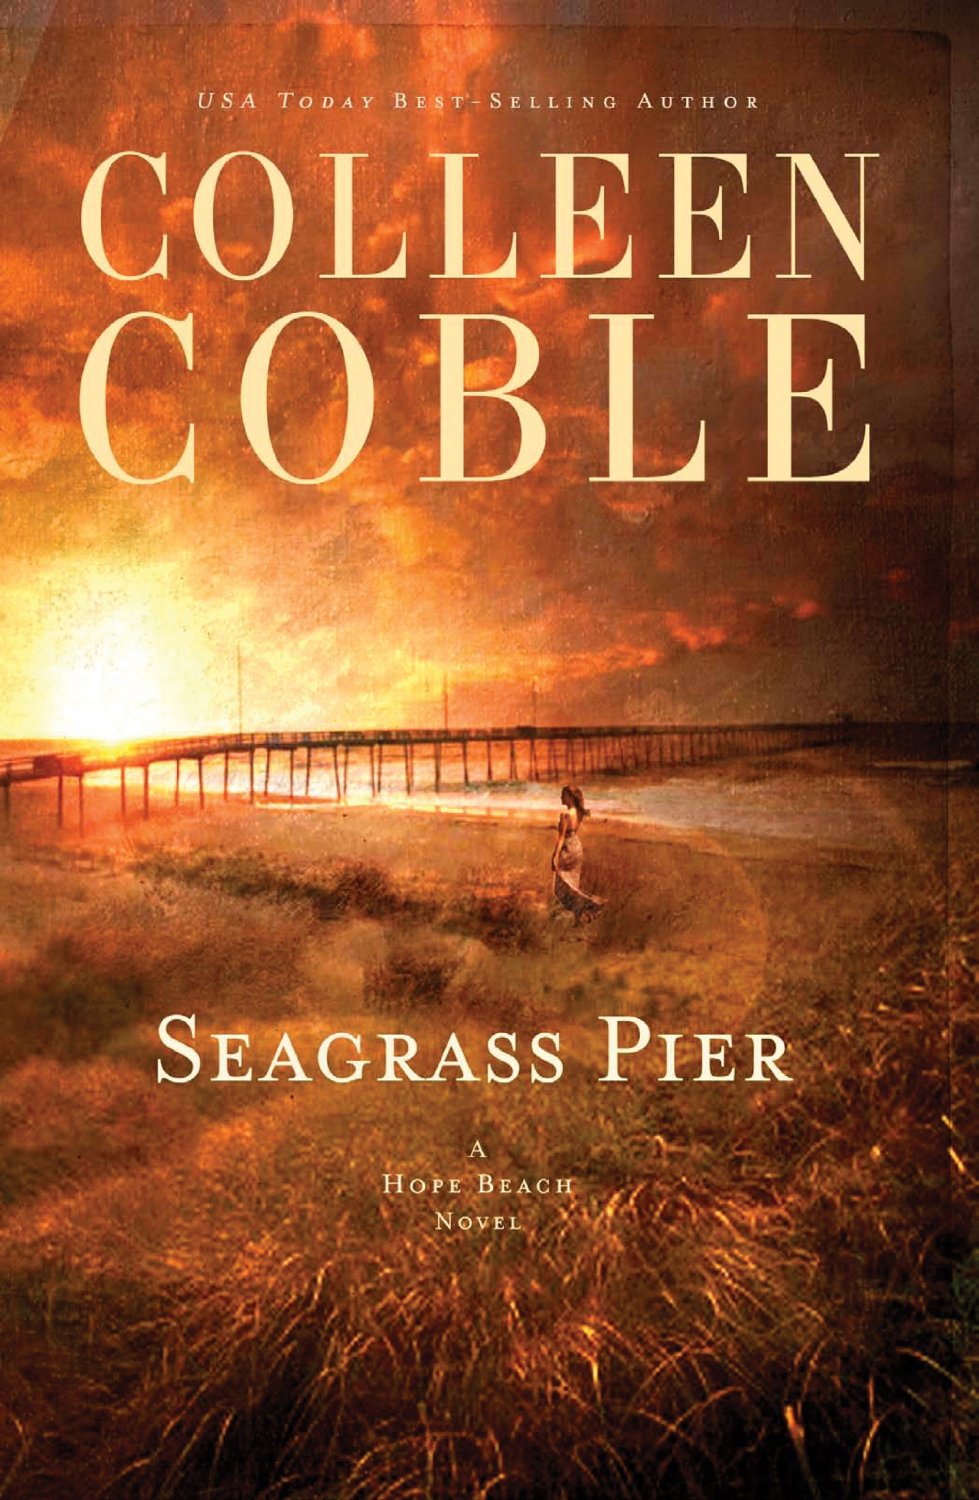 Book Review: Seagrass Pier by Colleen Coble